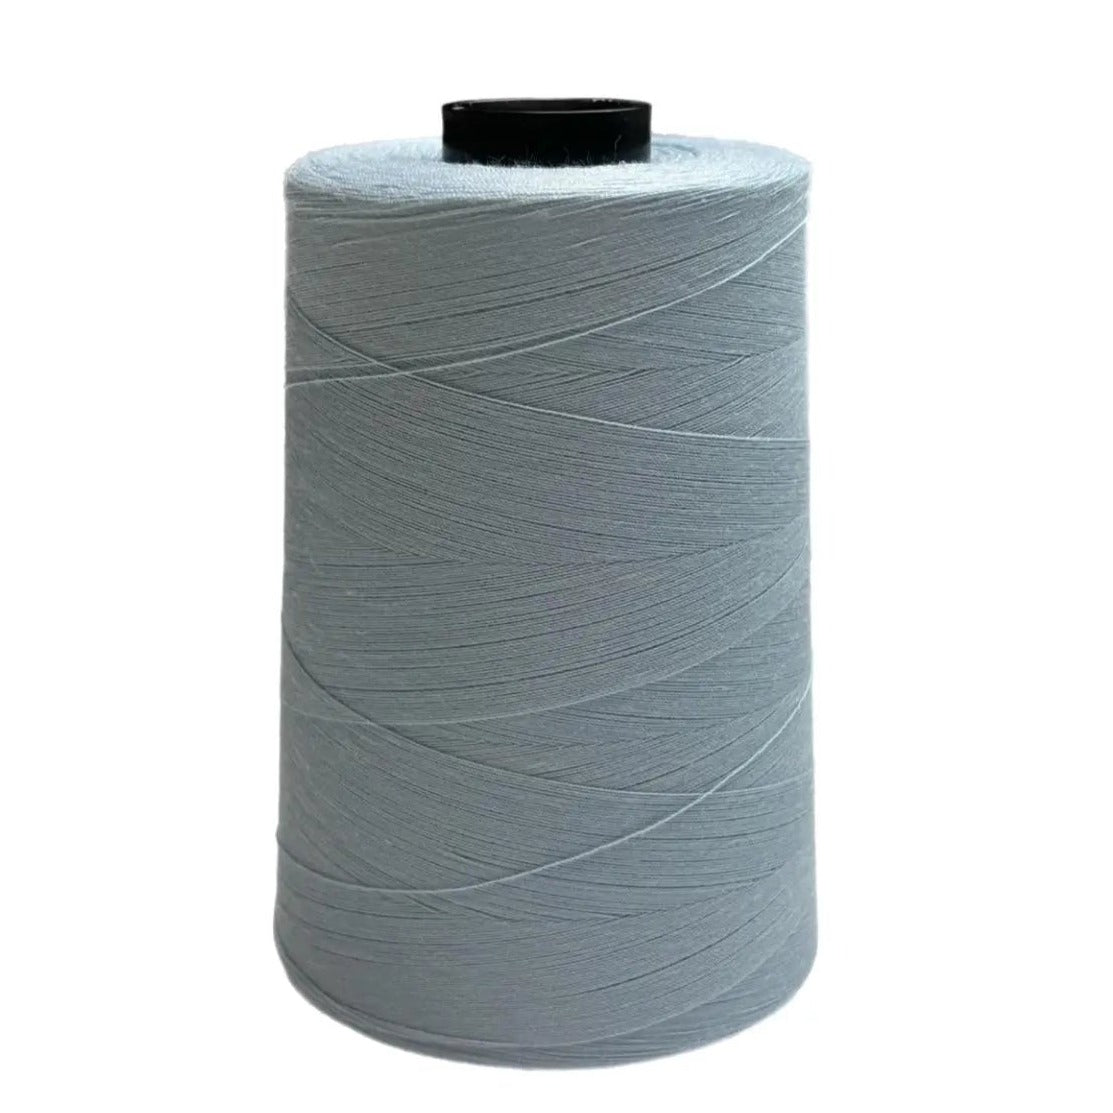 W32056 Chambray Perma Core Tex 30 Polyester Thread American & Efird Permacore